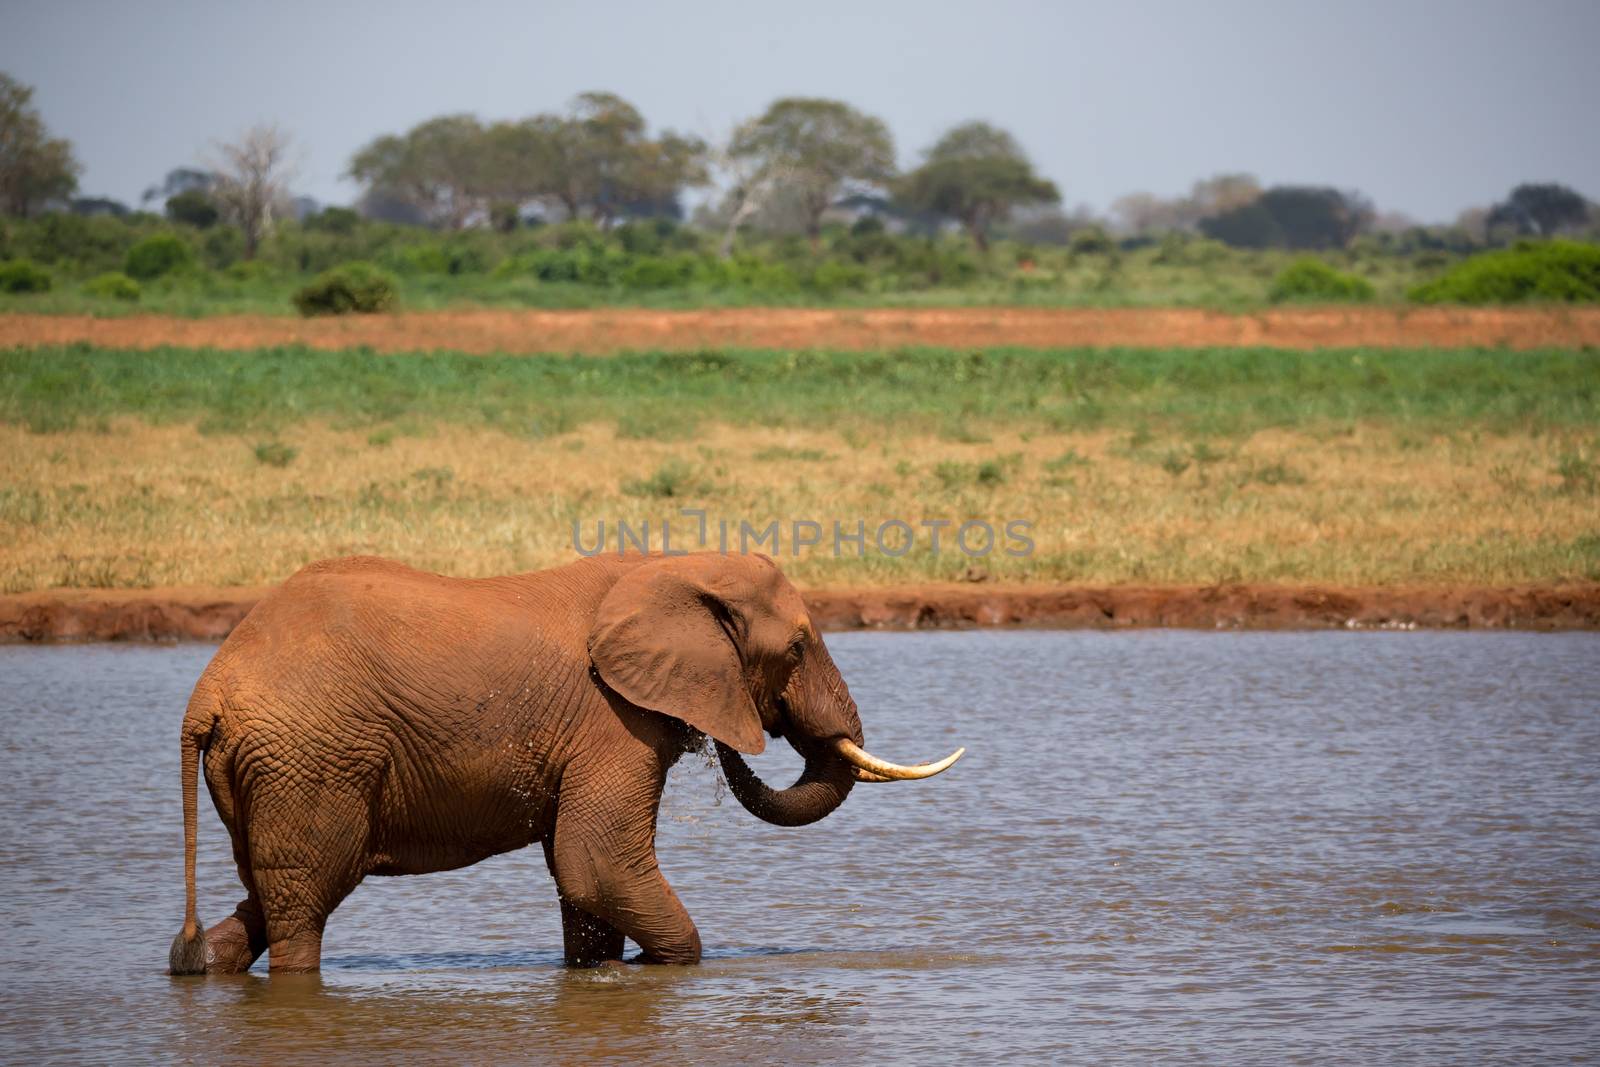 One red elephant drinks water from a water hole